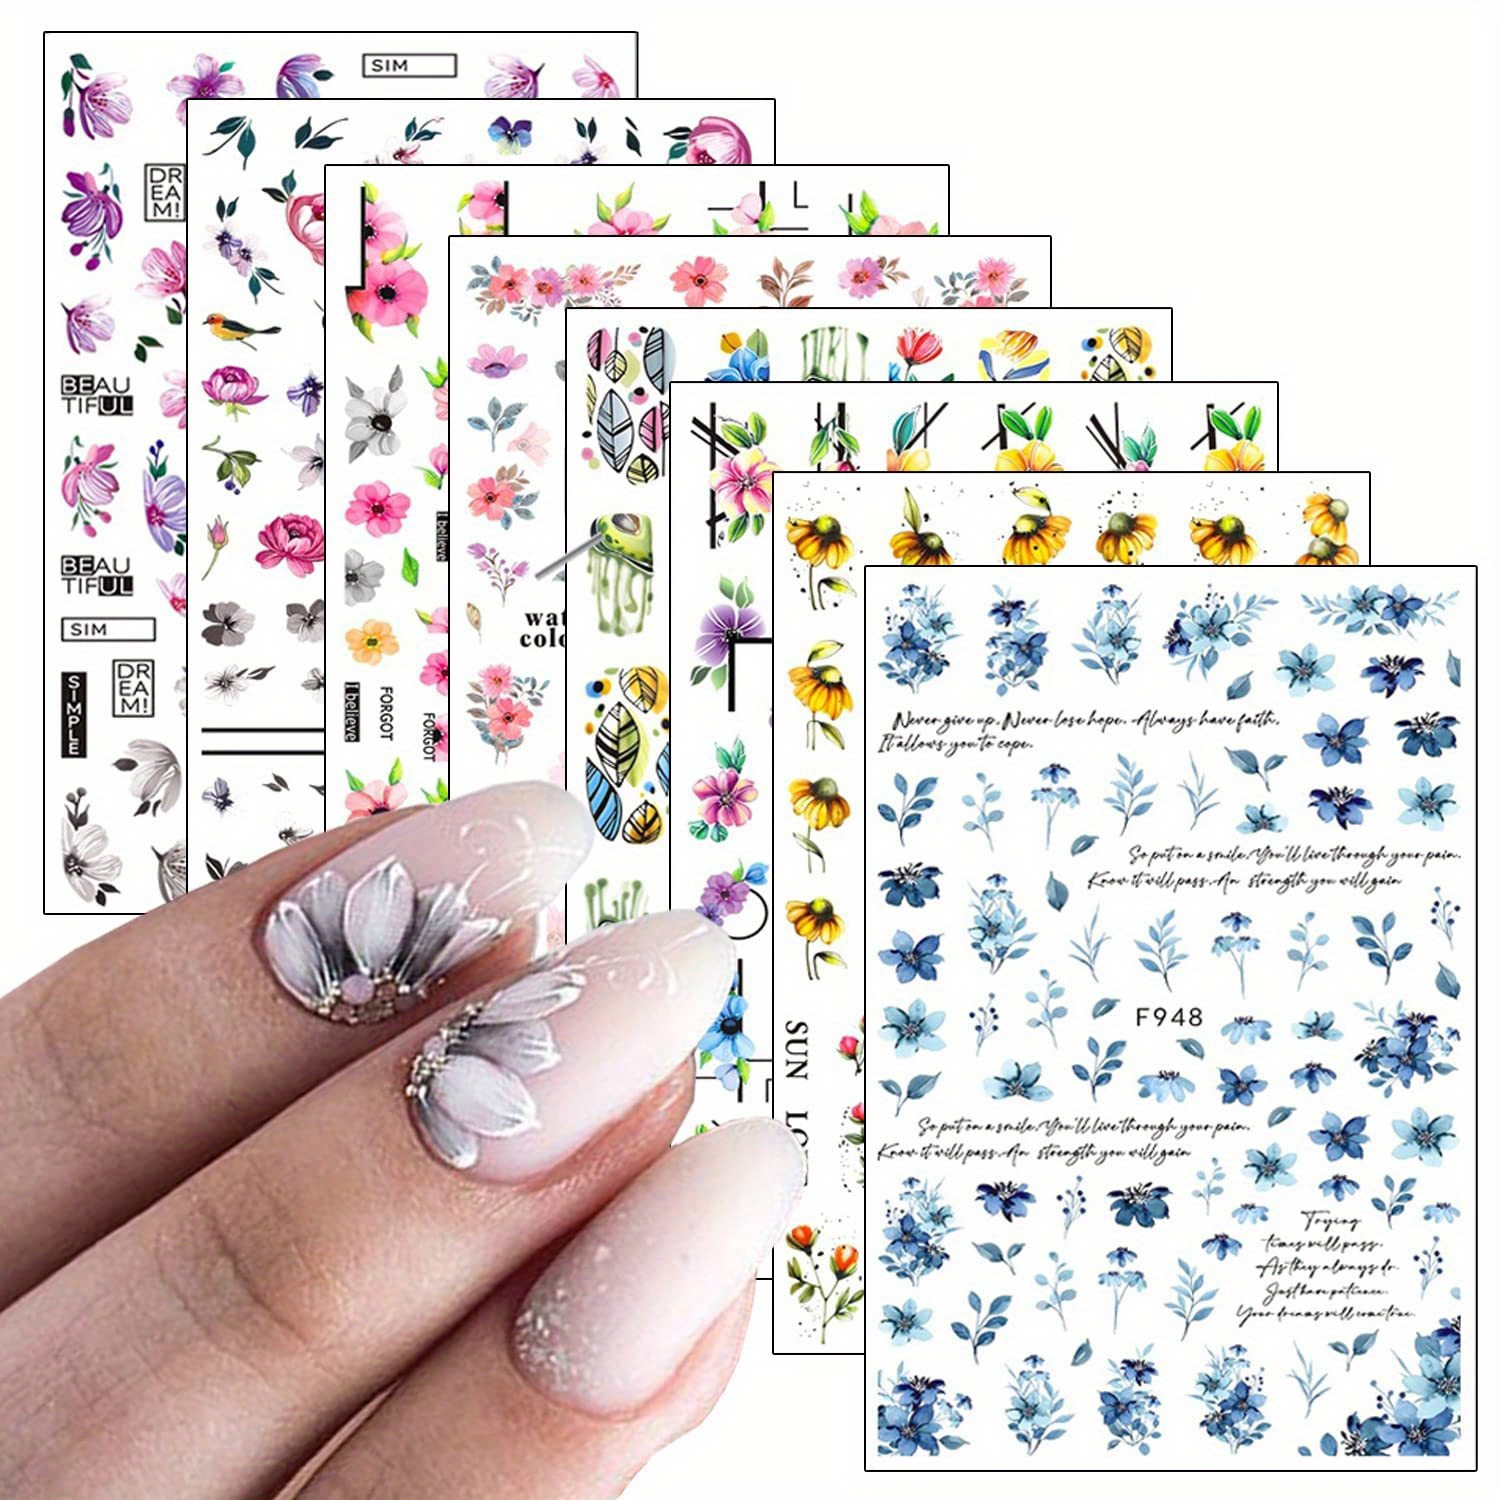 

8 Sheets, 3d Holographic Flower Nail Art Stickers, Colorful Self-adhesive Resin Floral Decals, Diy Nail Art Decorations For Women